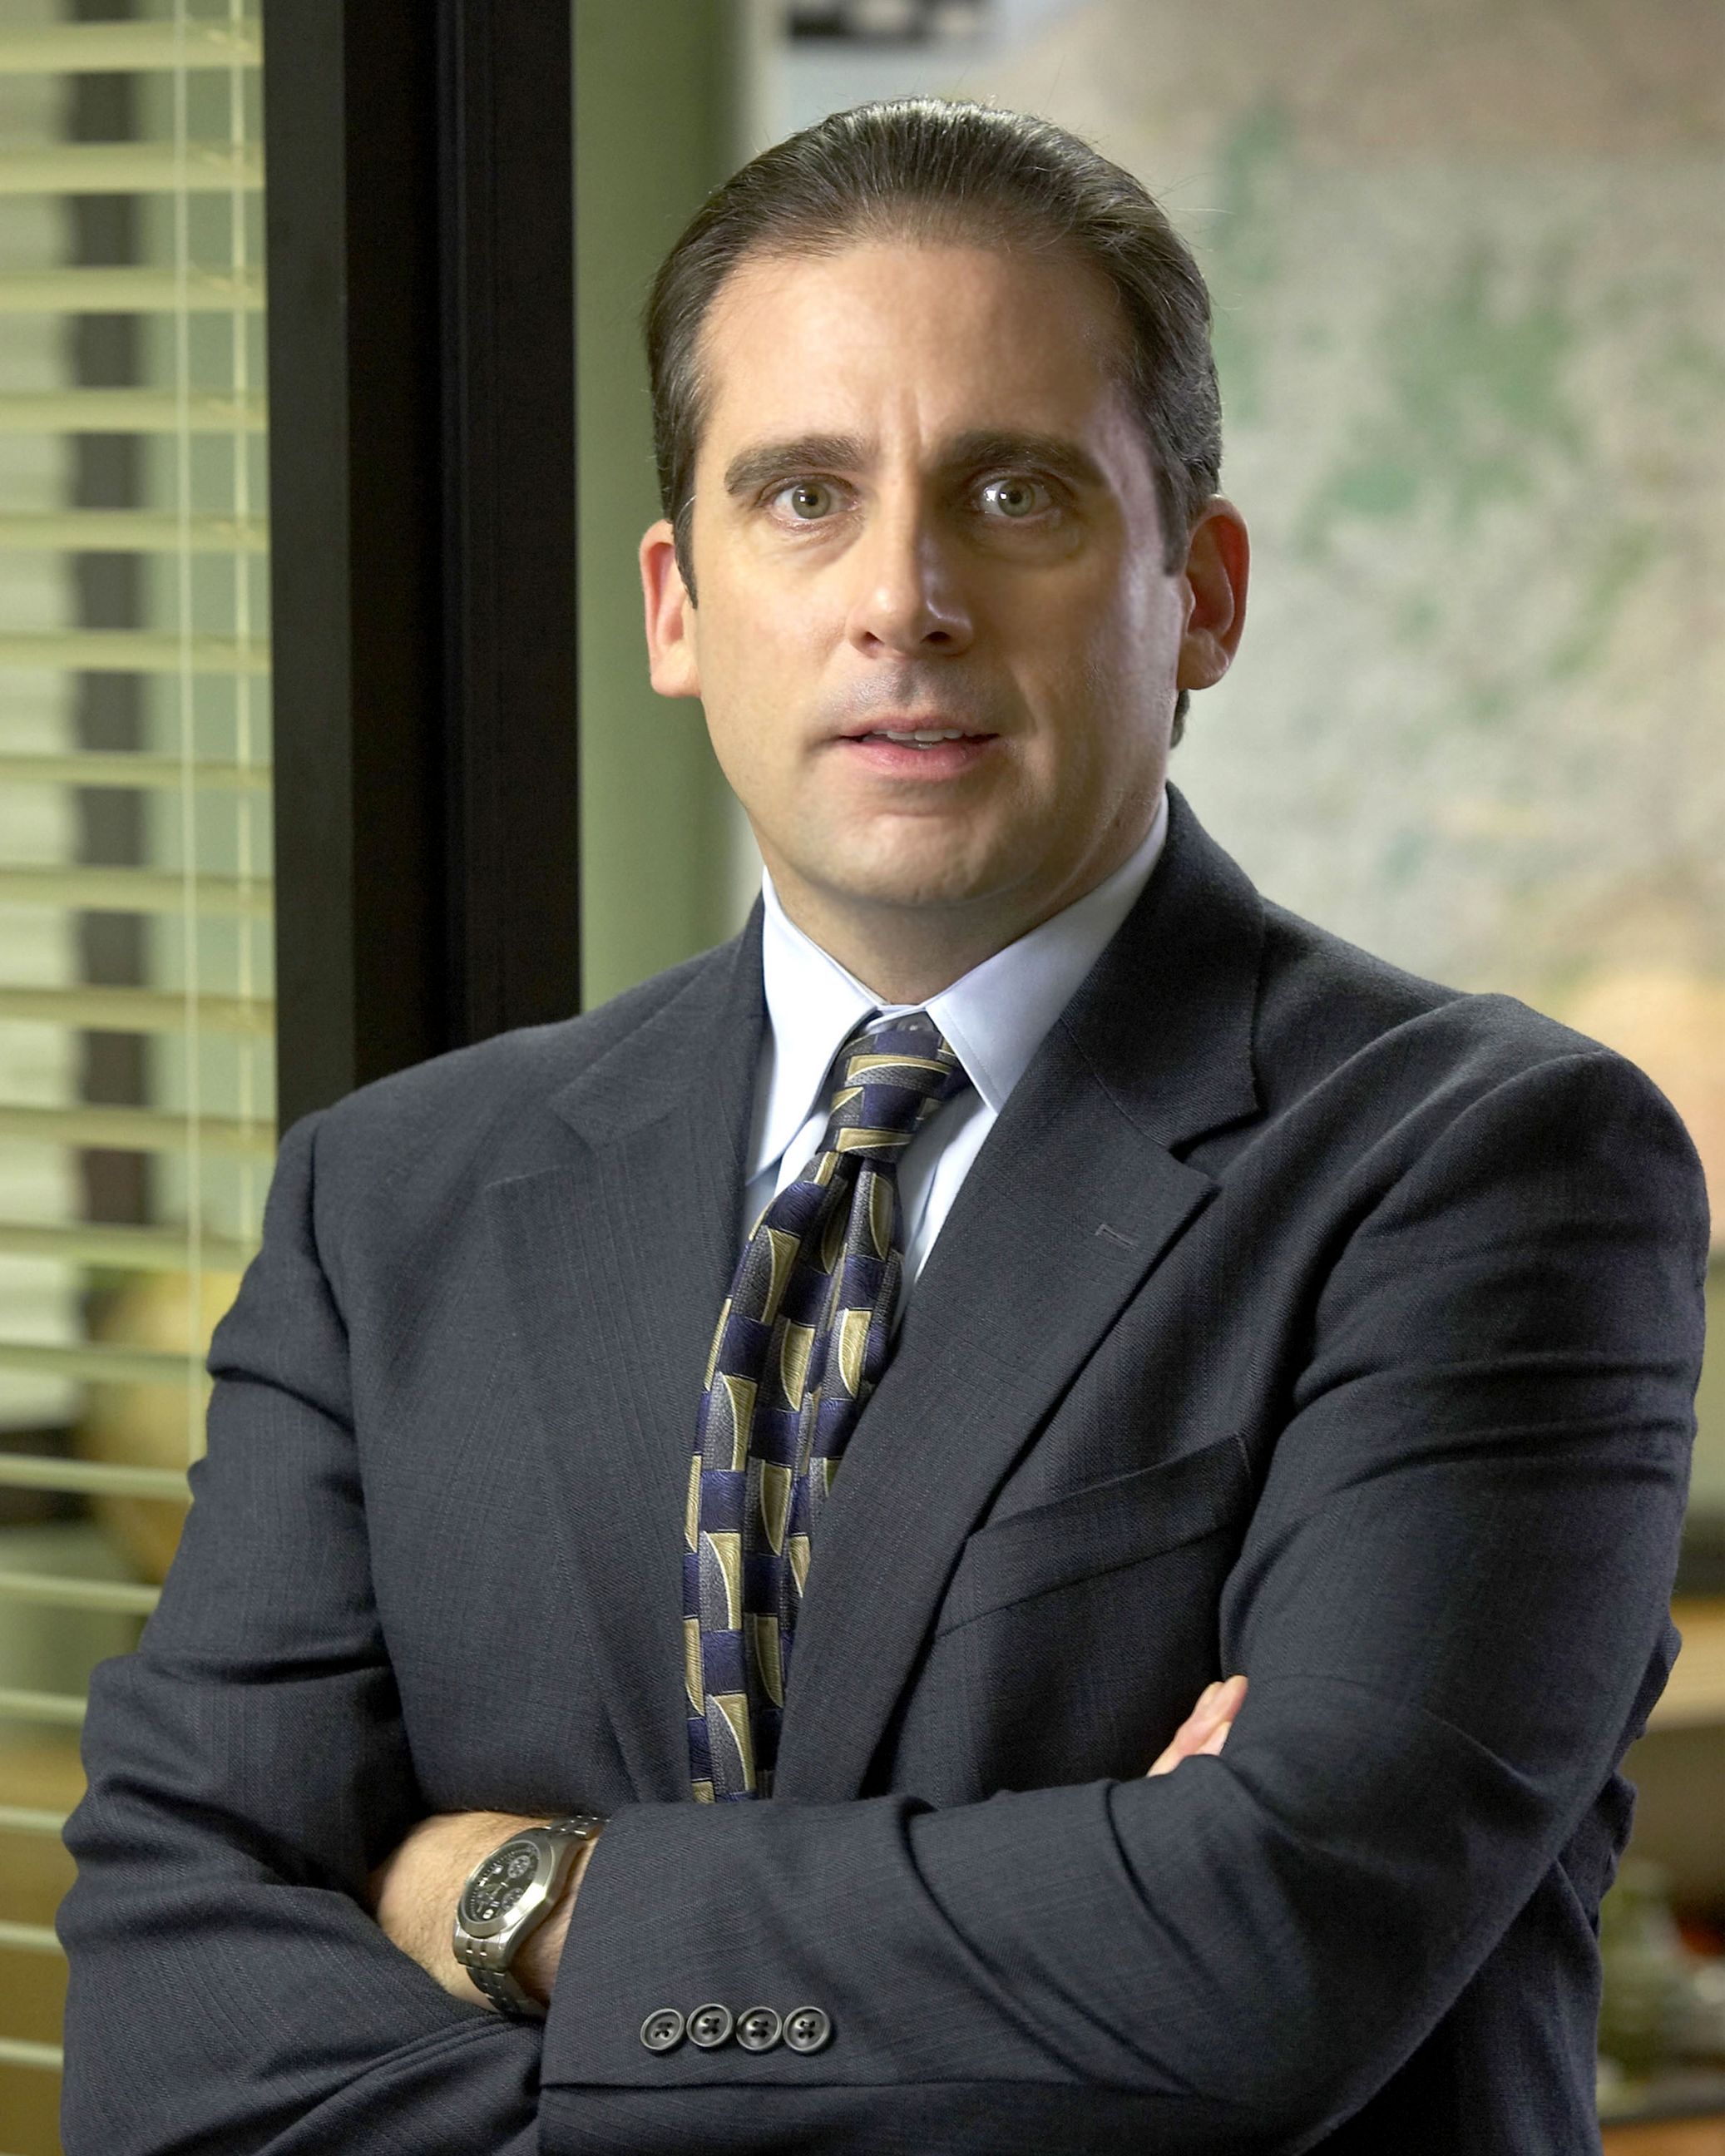 Dunder Mifflin Sabre, Dunderpedia: The Office Wiki